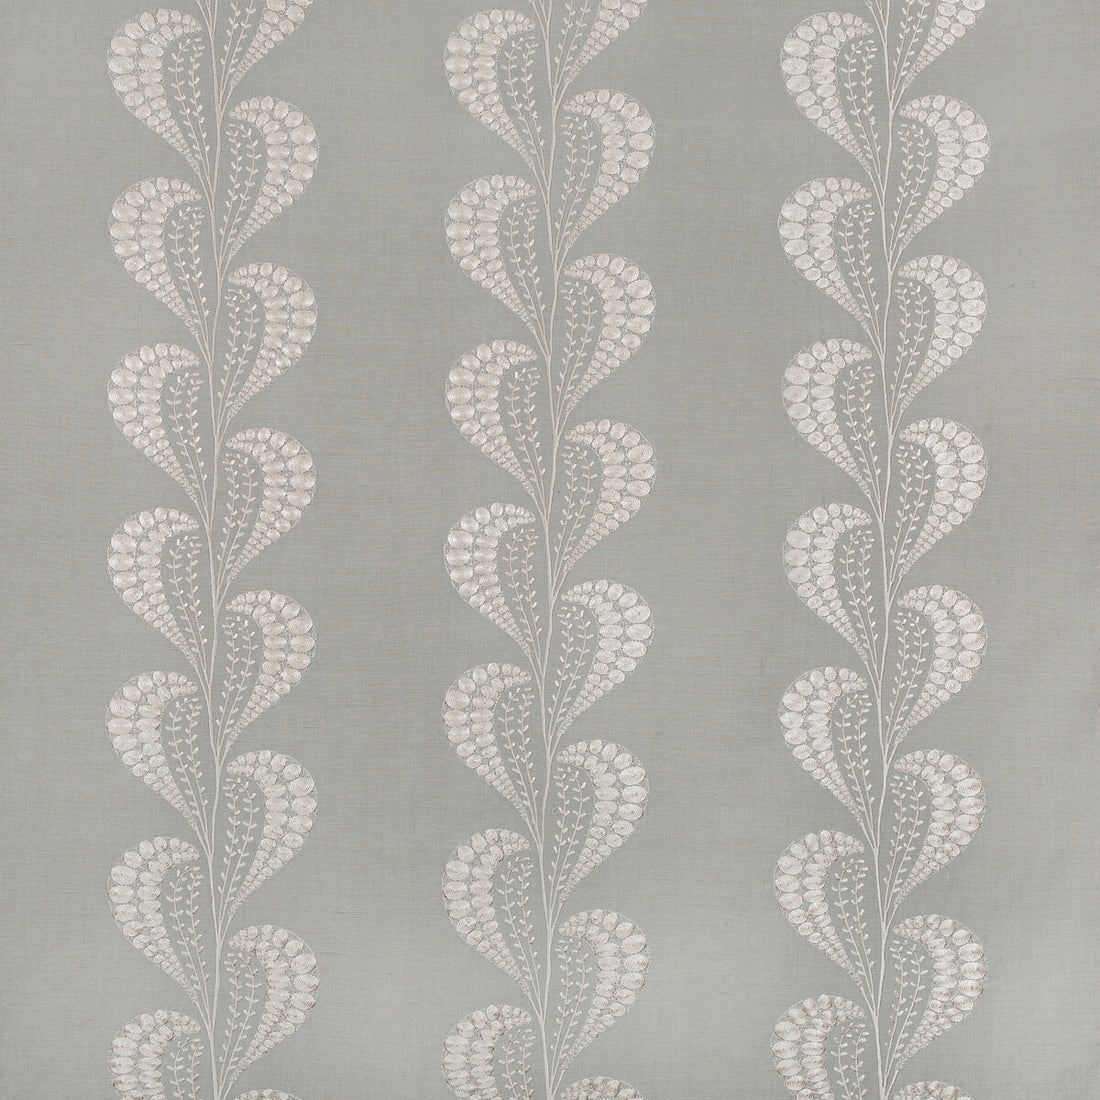 Tisza fabric in pewter color - pattern 4787.11.0 - by Kravet Couture in the Windsor Smith Naila collection